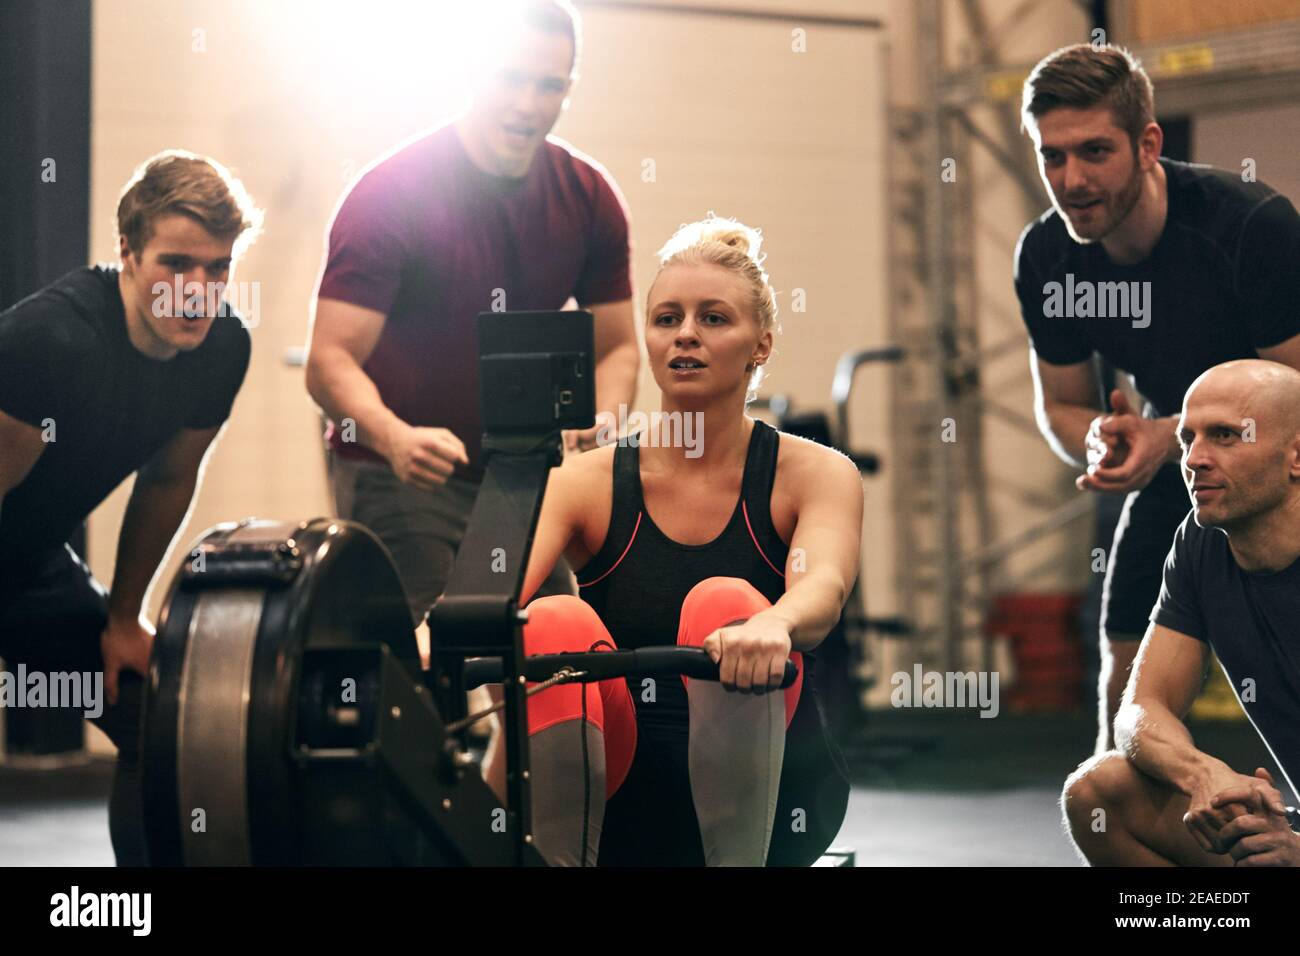 Fit young woman being supported by a group of gym friends during a workout on a rowing machine Stock Photo